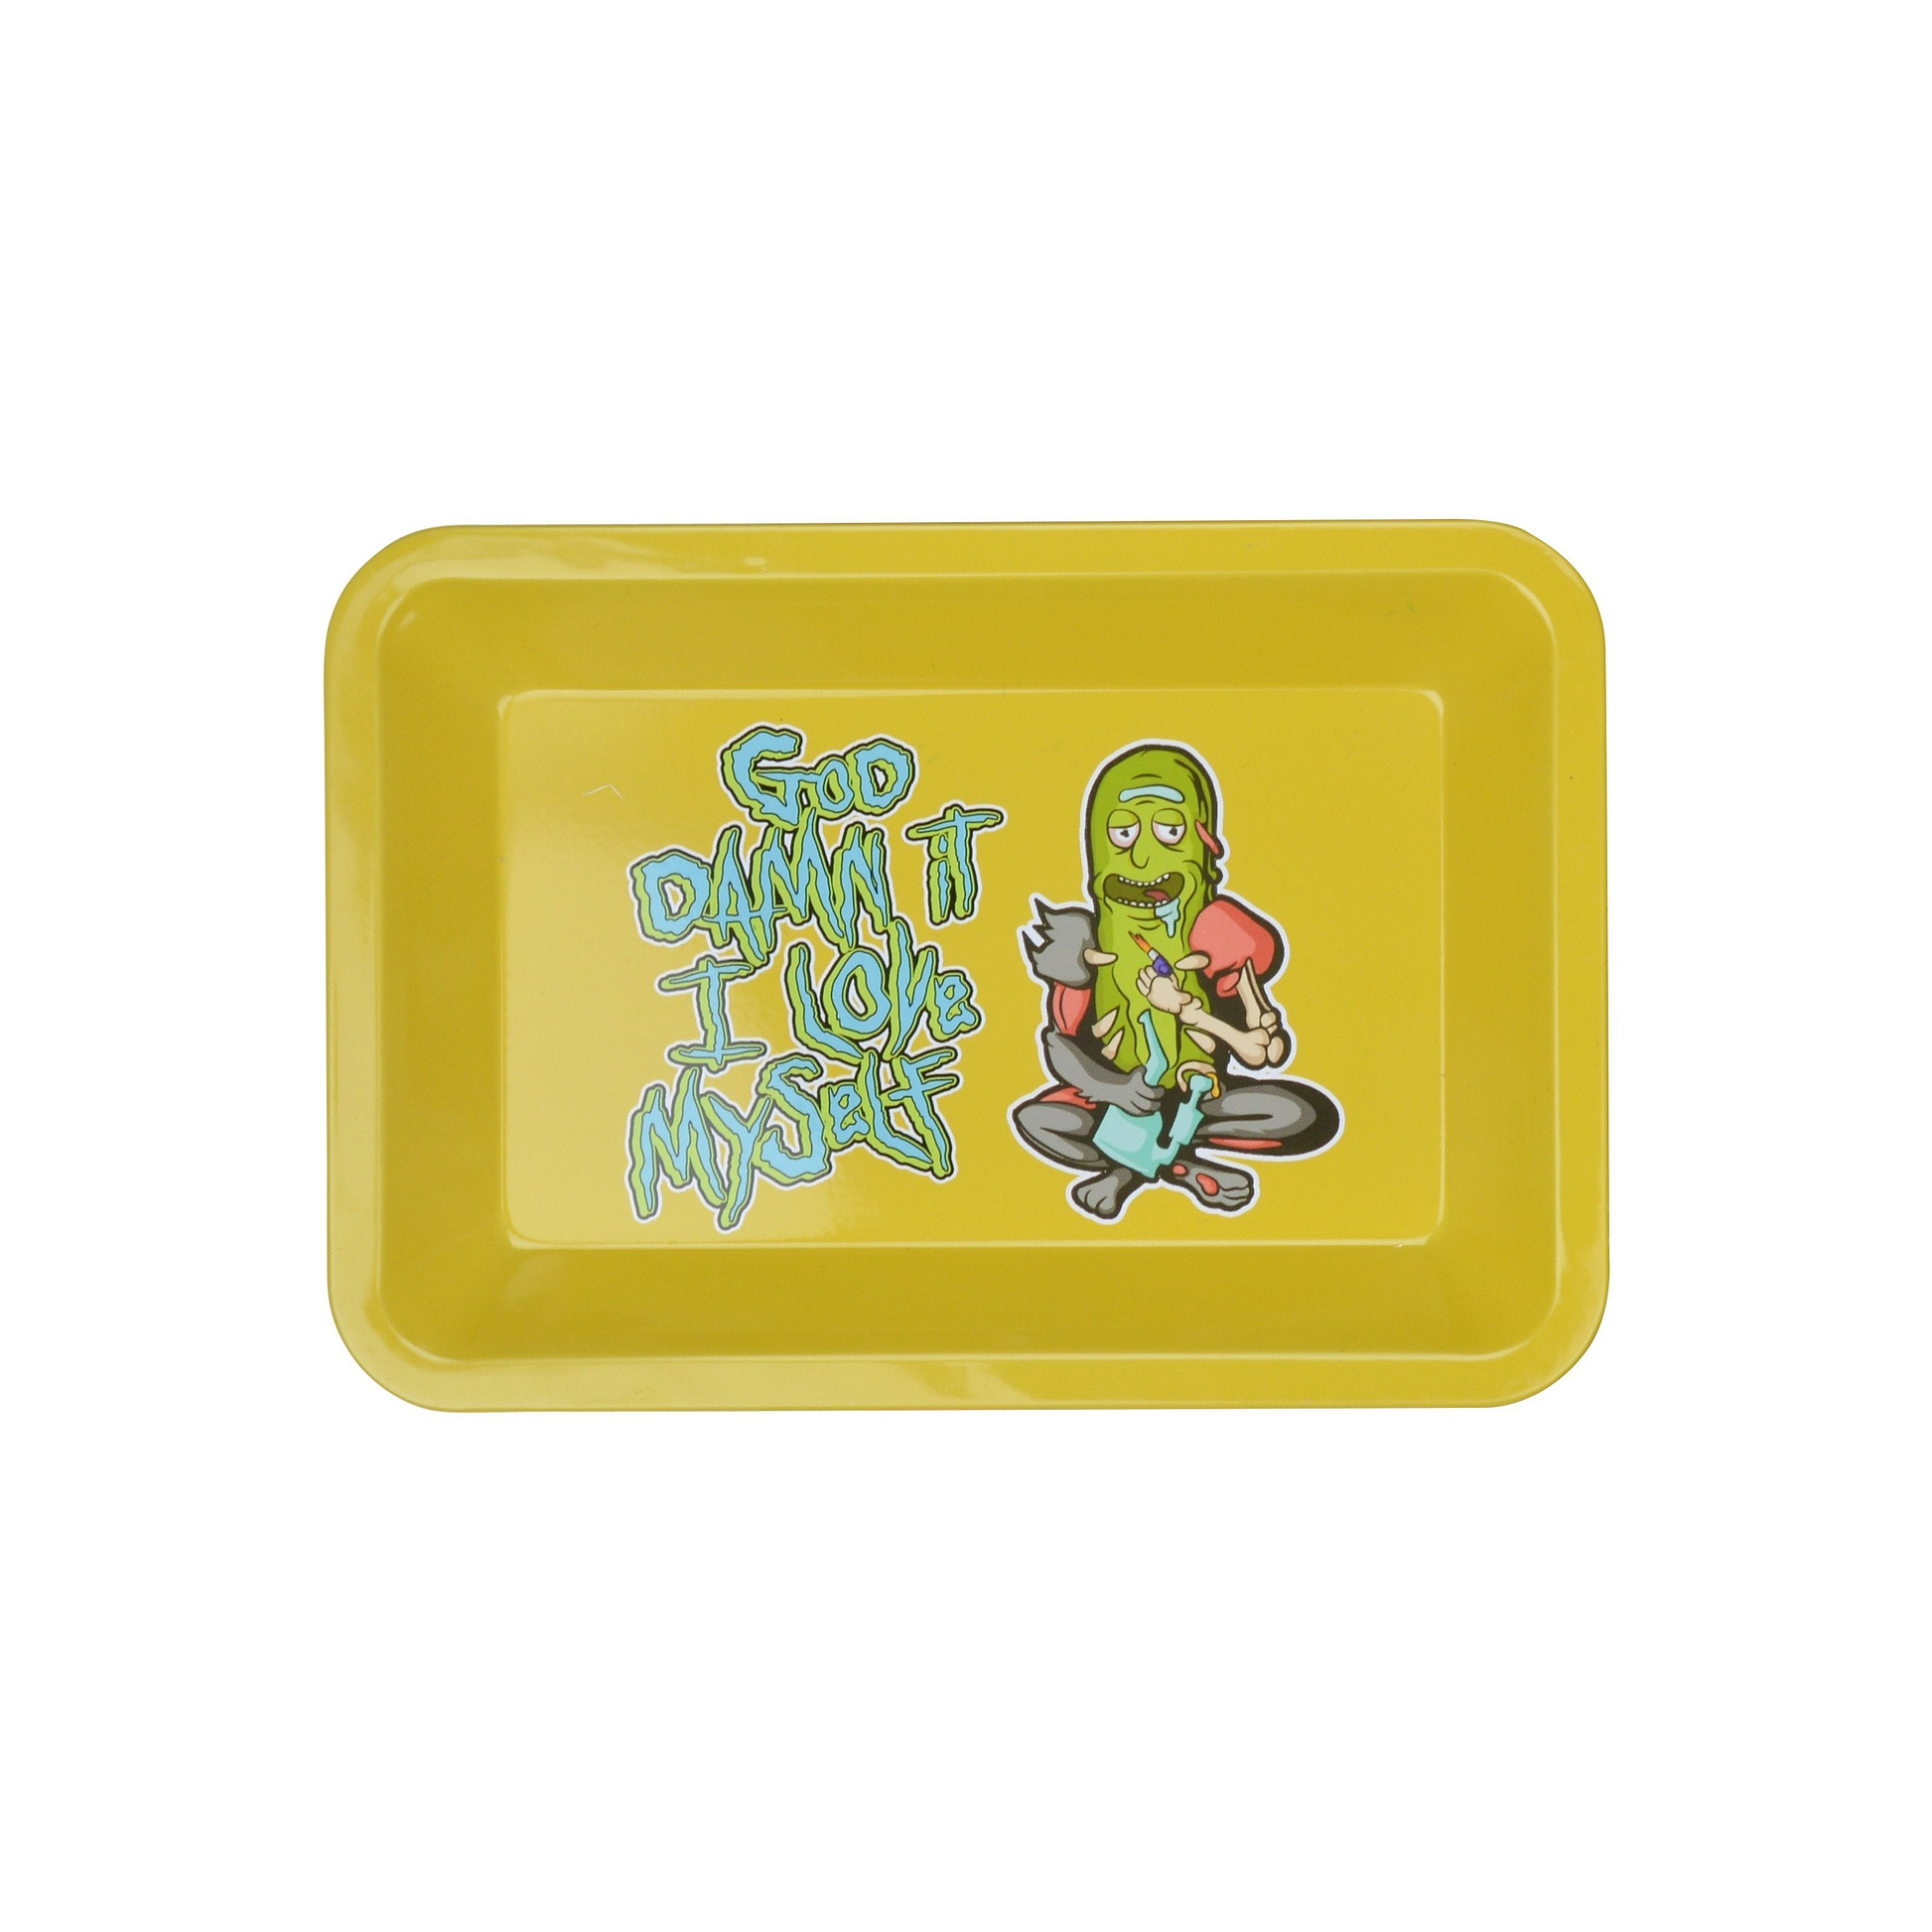 Large Metal Rolling Tray with Rick and Morty Design